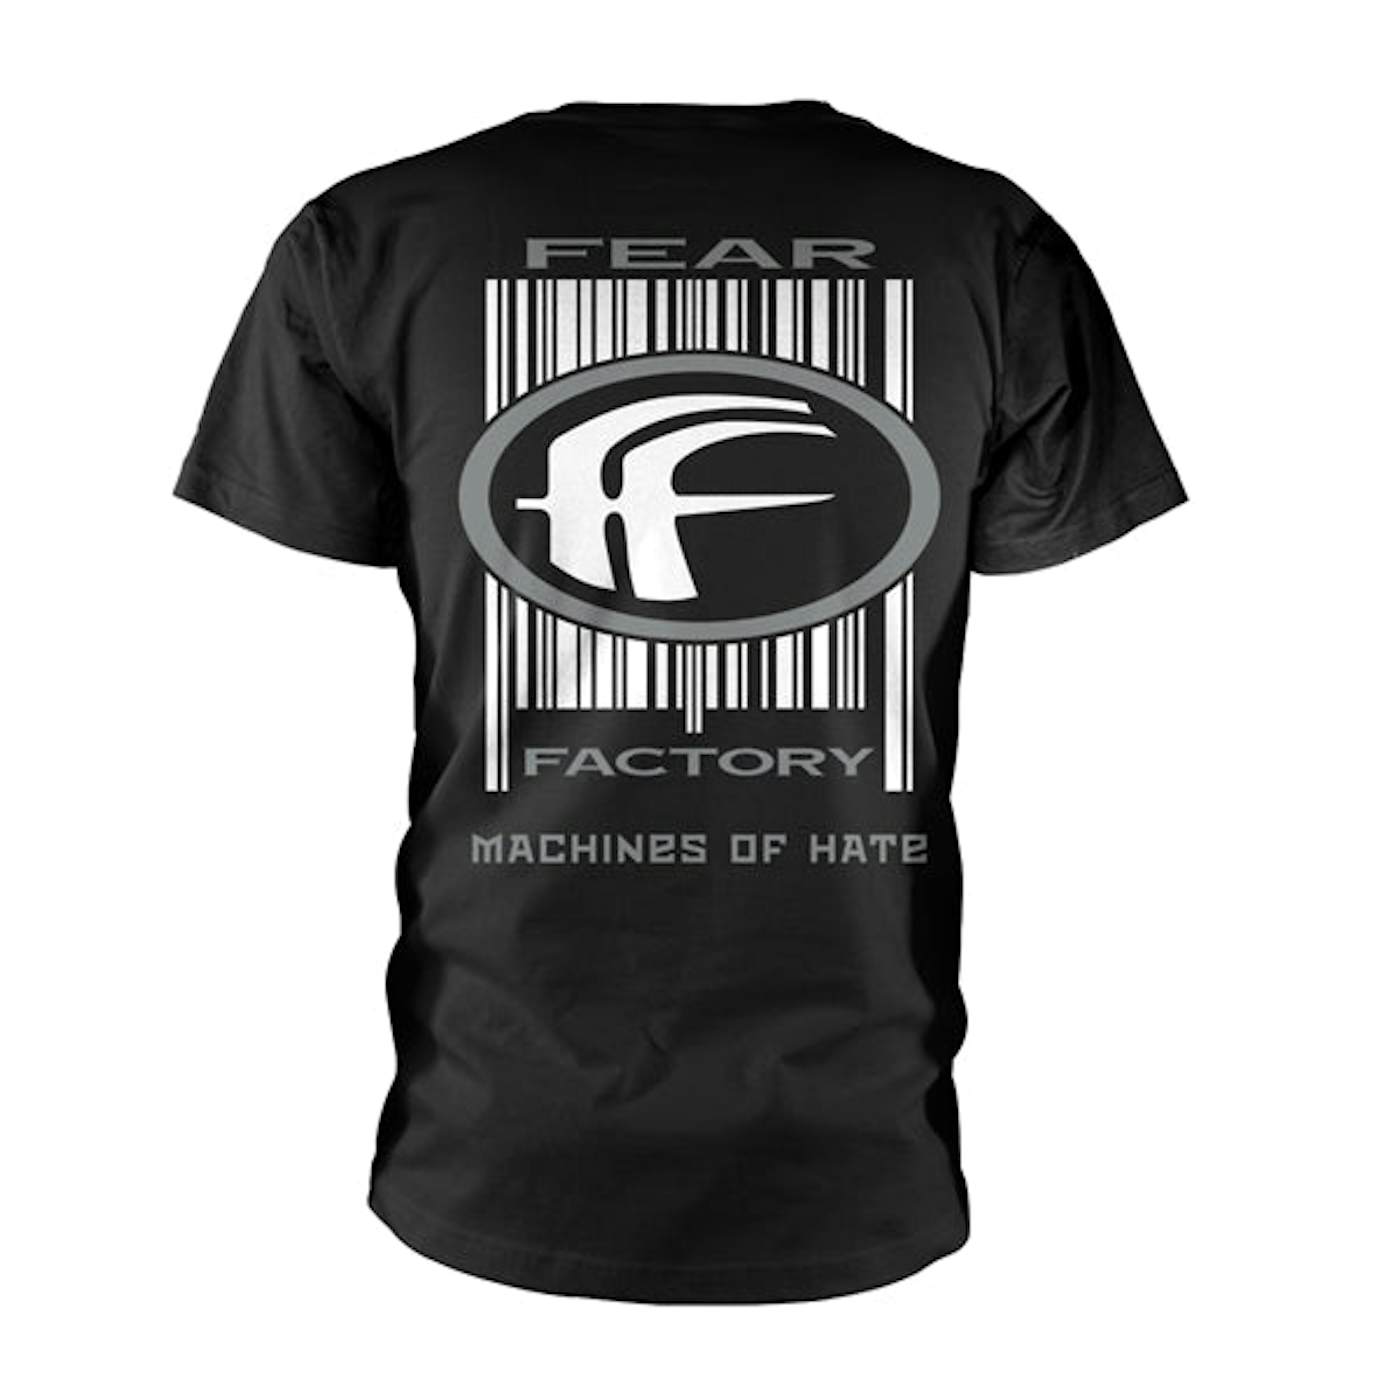 Fear Factory T-Shirt - Machines Of Hate